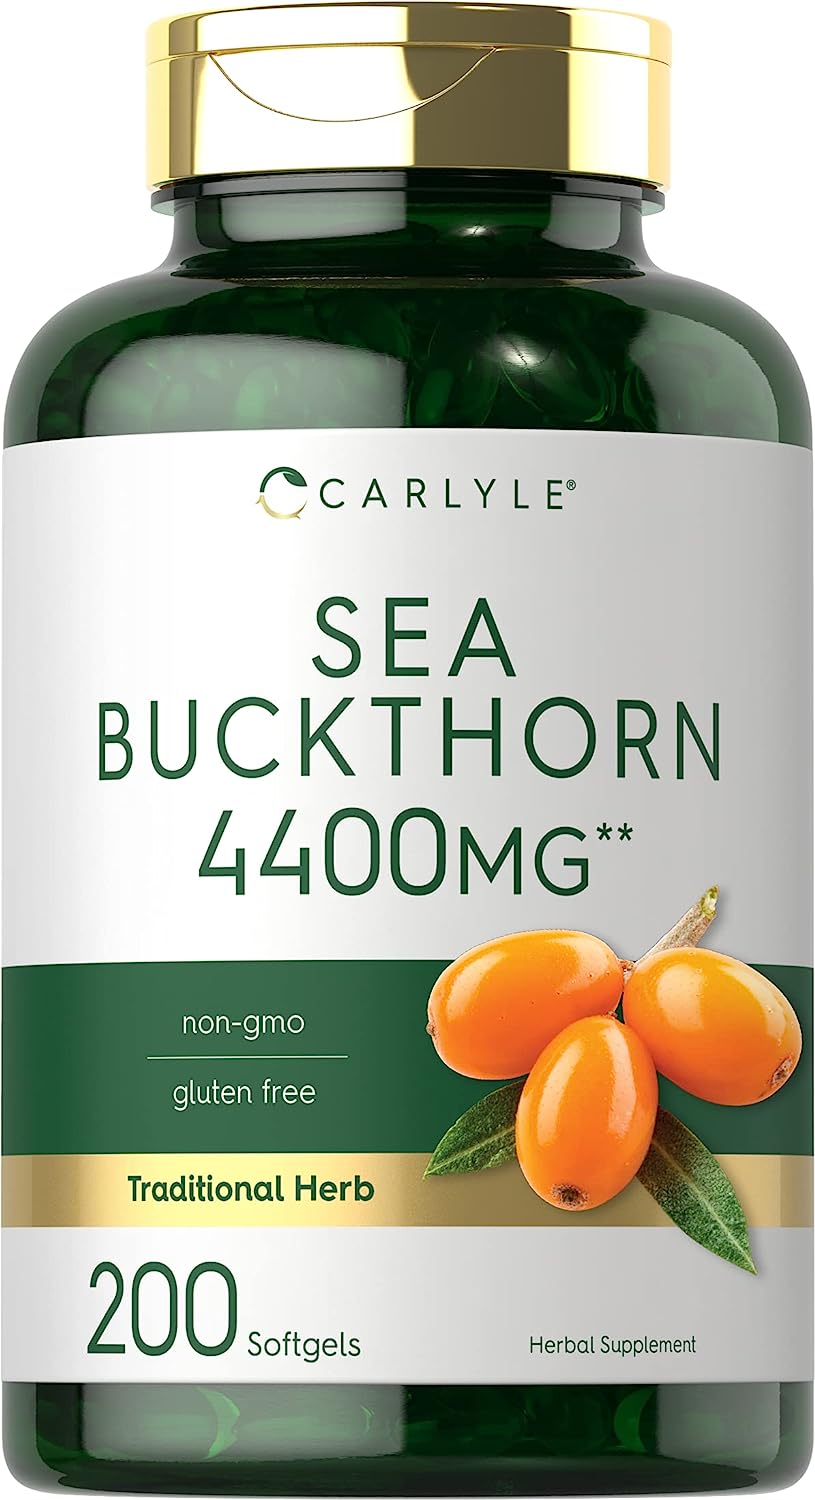 Sea Buckthorn Oil Capsules 4400mg | 200 Softgels | Non-GMO, Gluten Free | Sea Buckthorn Berry Oil Supplement | by Carlyl